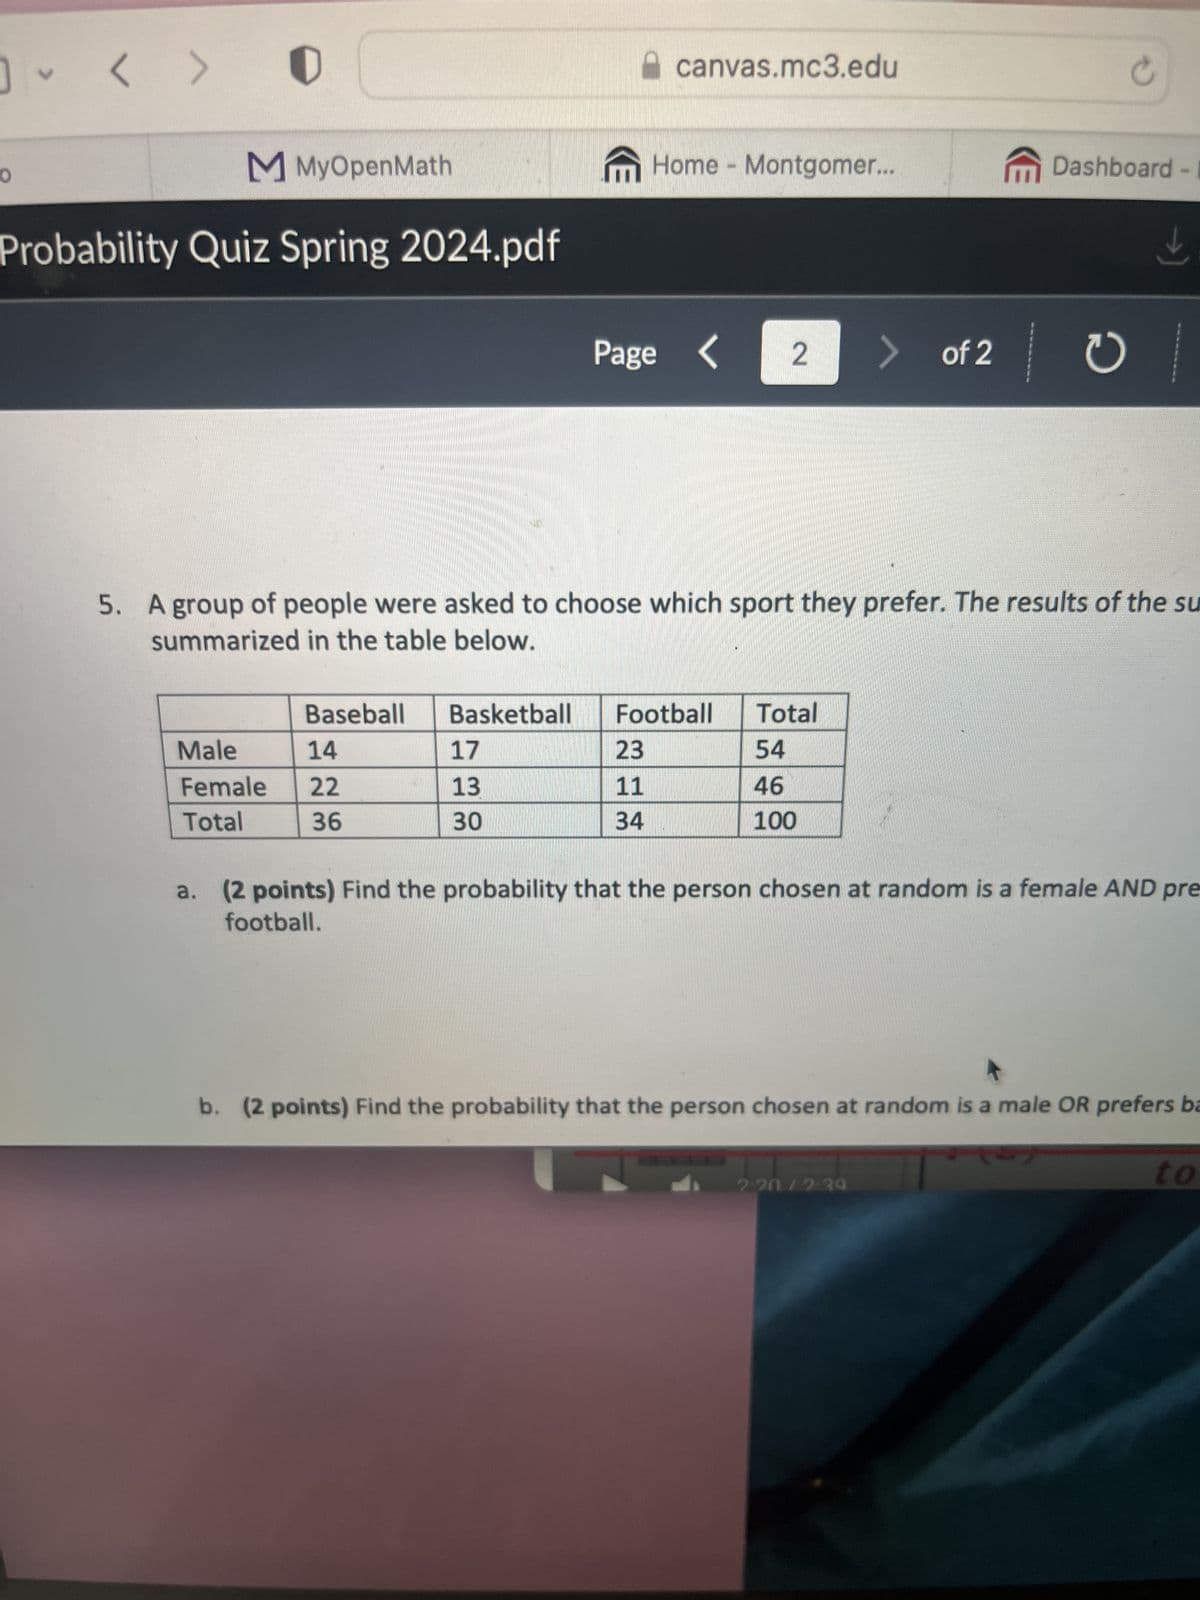 0
V
>
MMyOpenMath
Probability Quiz Spring 2024.pdf
canvas.mc3.edu
C
Home Montgomer...
m
Dashboard - I
Page < 2
> of 2
of 2 0
5. A group of people were asked to choose which sport they prefer. The results of the su
summarized in the table below.
Baseball
Basketball
Football
Male
14
17
23
Total
54
Female
22
13
11
46
Total
36
30
34
100
a. (2 points) Find the probability that the person chosen at random is a female AND pre
football.
b. (2 points) Find the probability that the person chosen at random is a male OR prefers ba
2:20/2-39
to